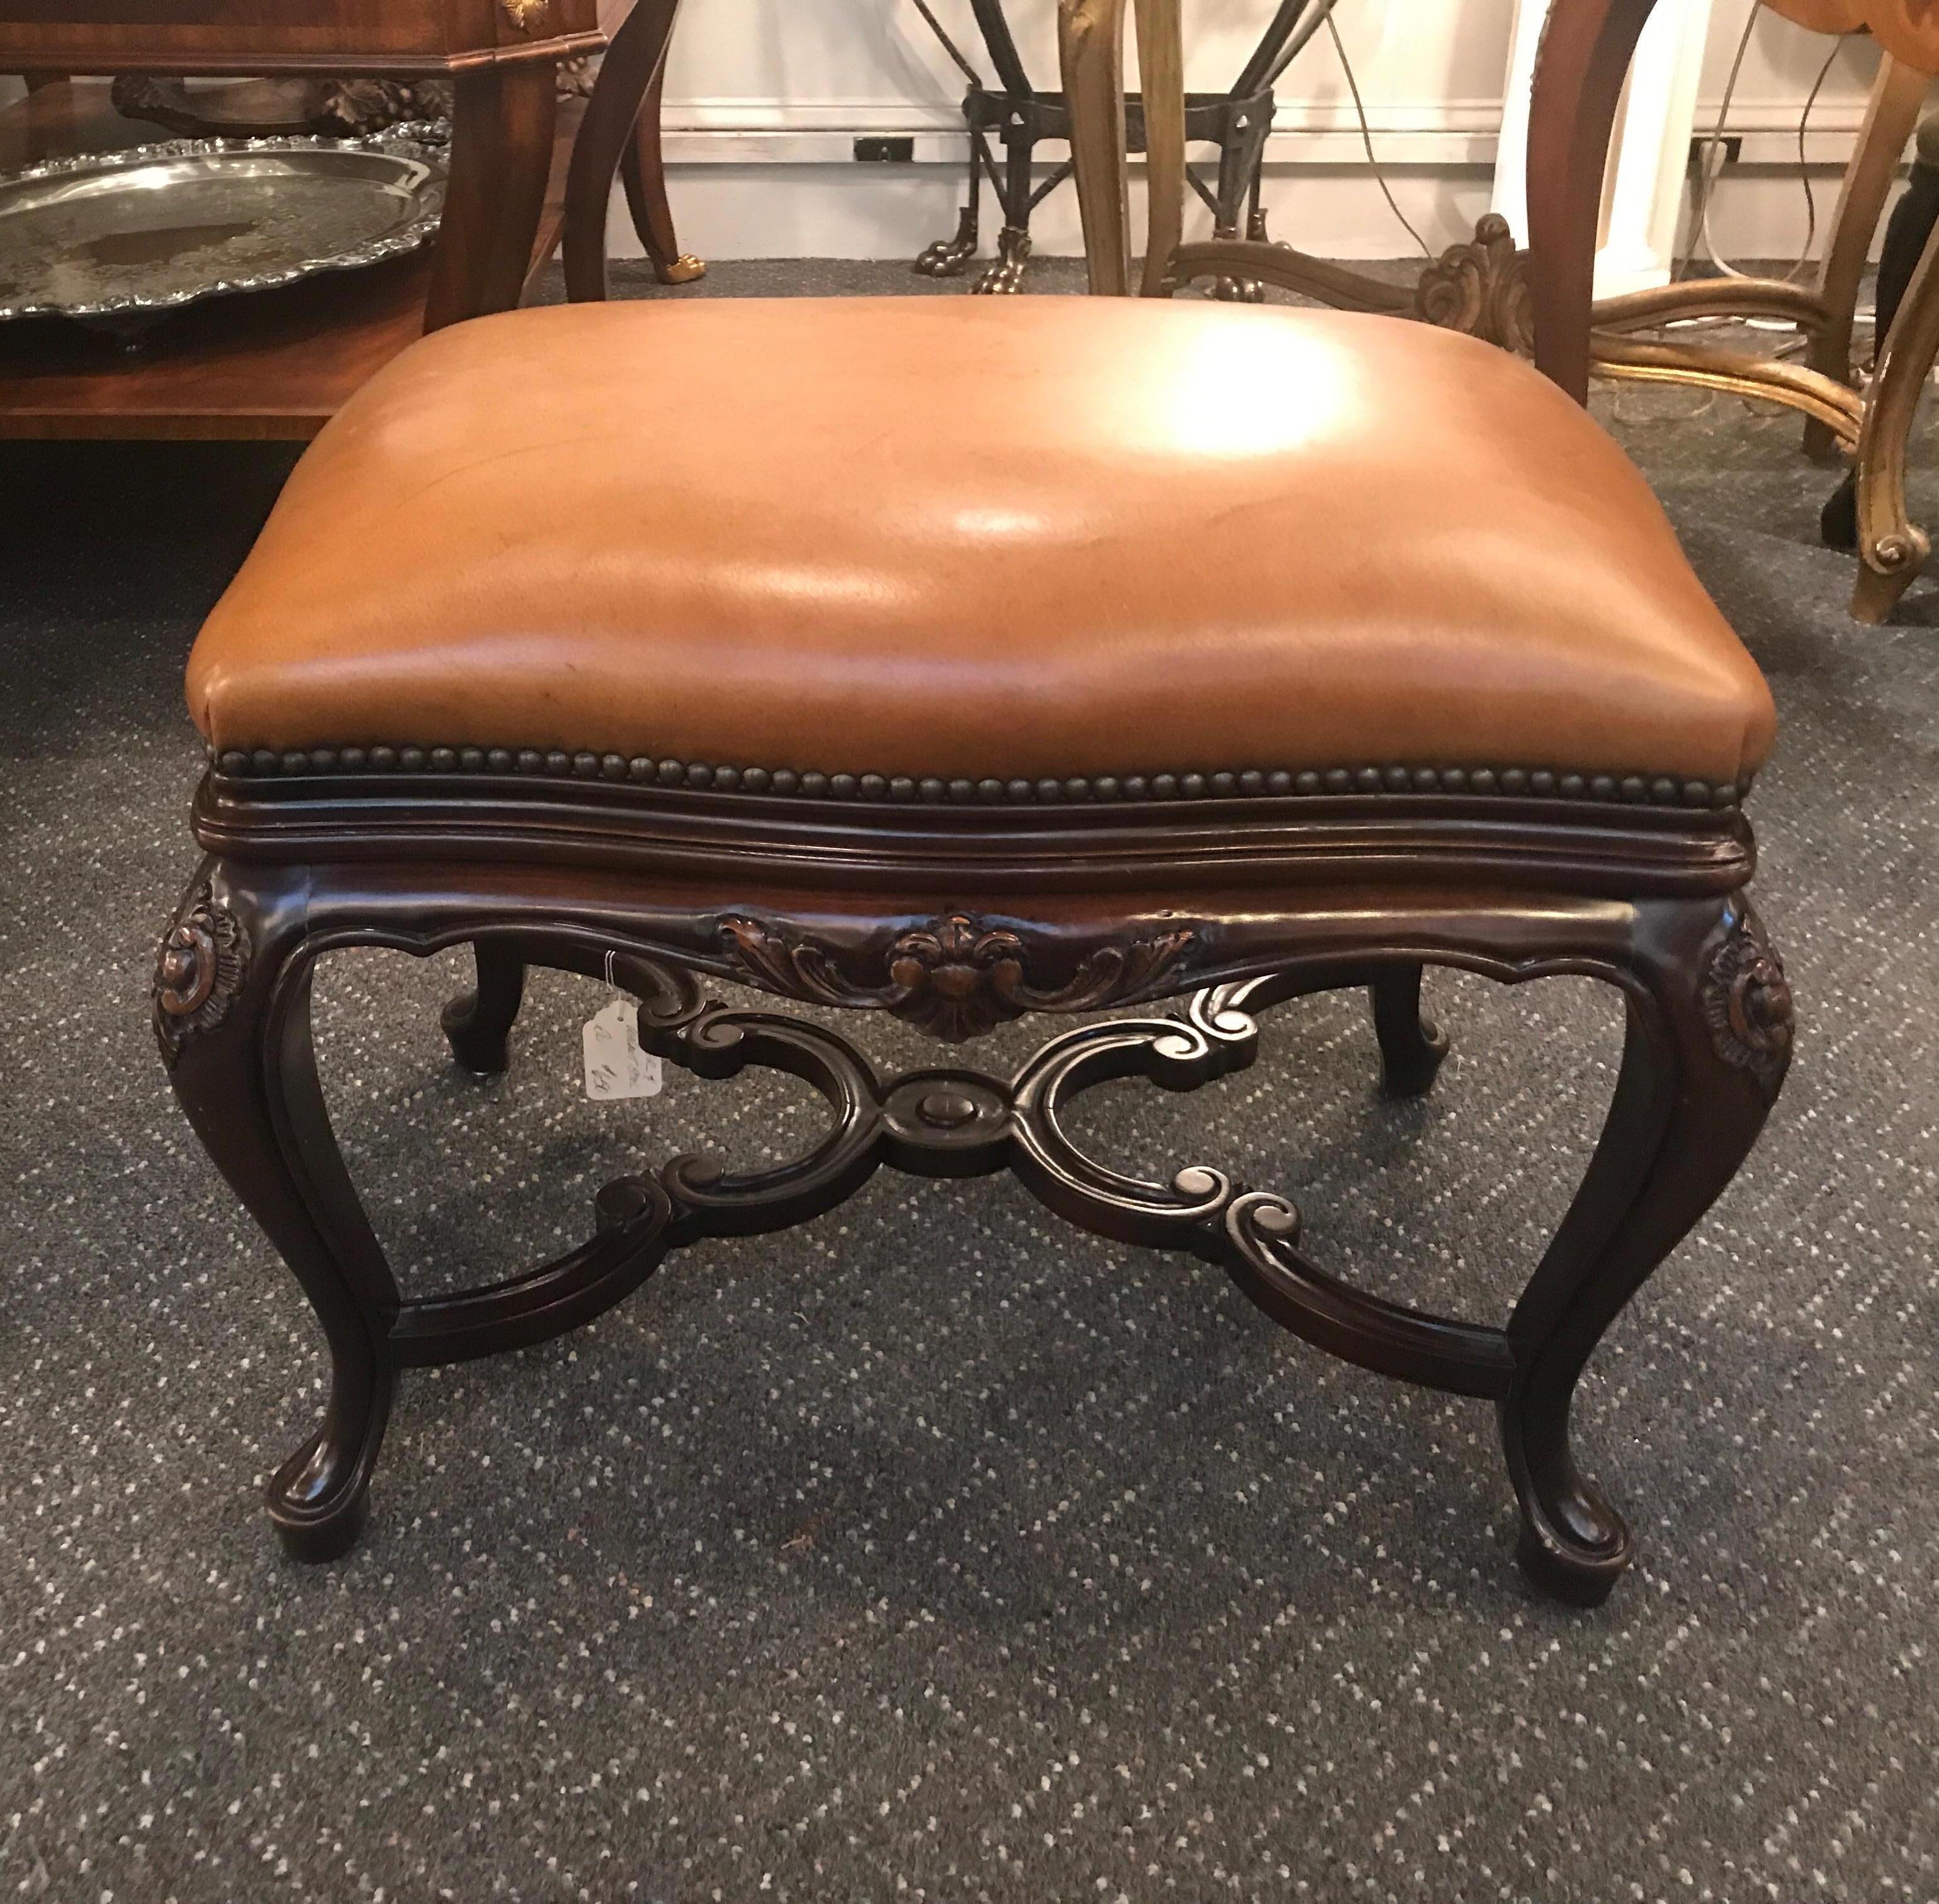 A deep brown walnut base with nicely carved details with camel color leather seat and aged nailhead trim. The carved legs with cabriole shape with a nicely detailed stretcher base. There are some natural variations in the leather.   
  